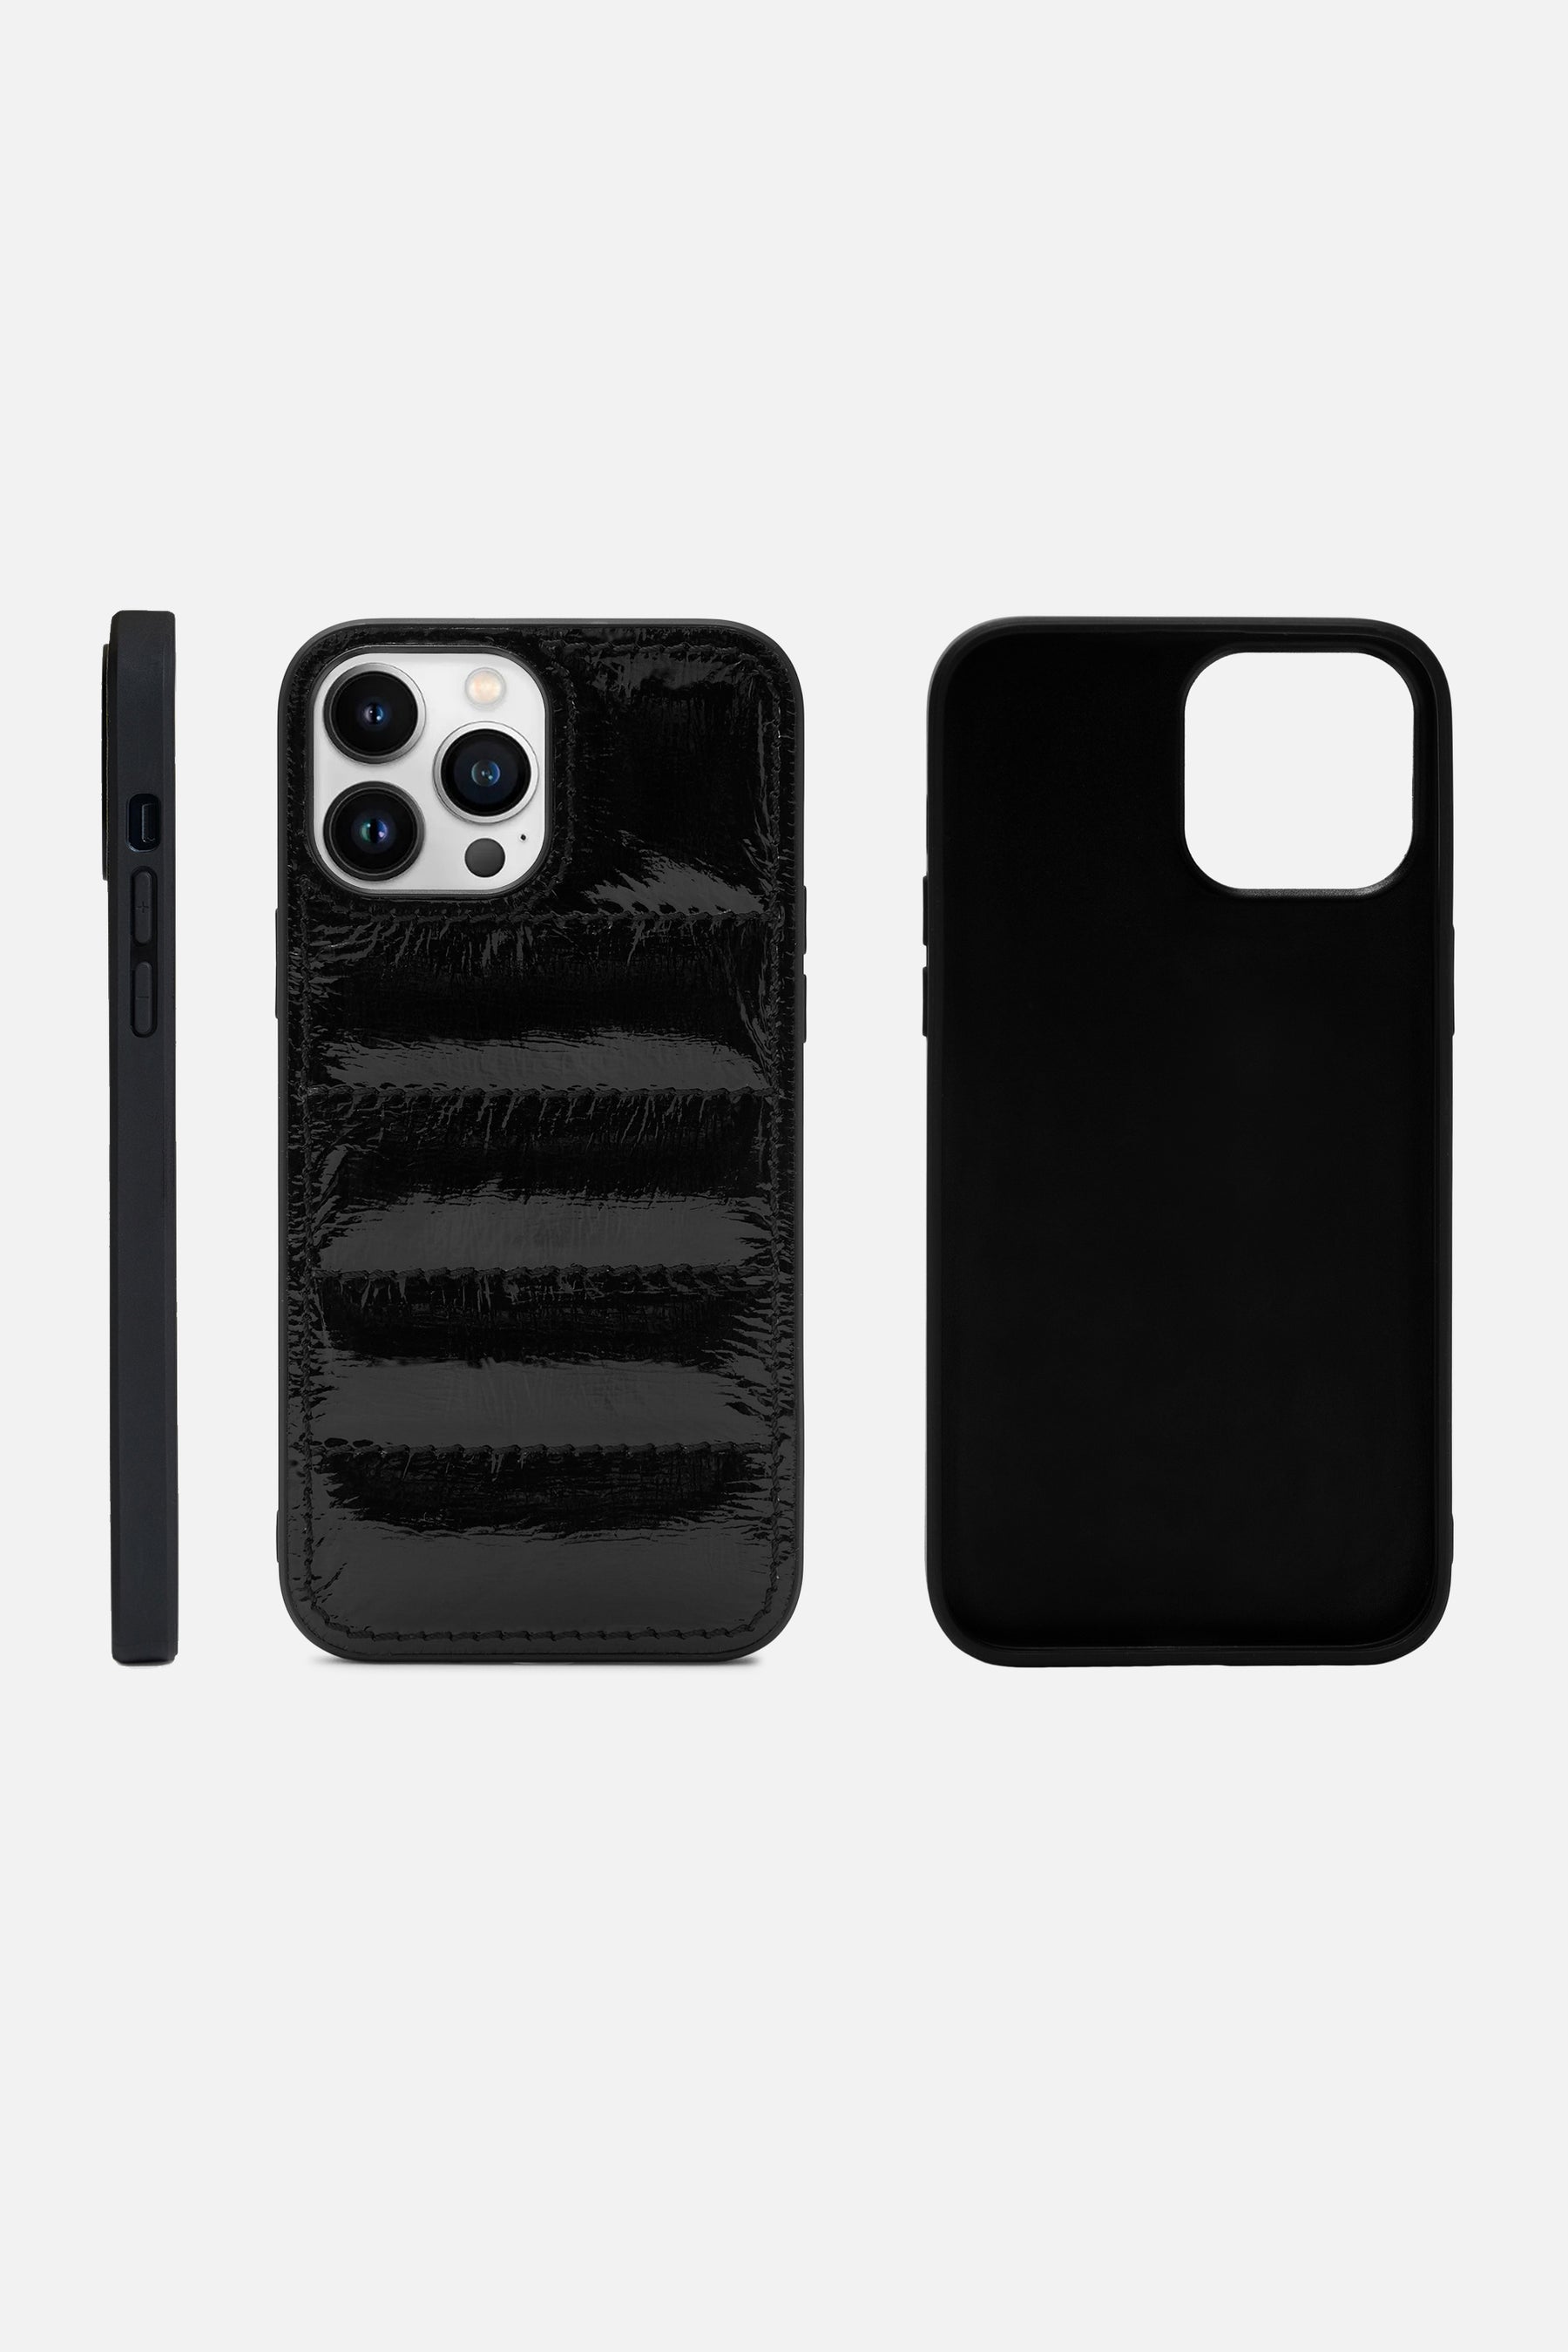 Iphone Puffer Case - Quilted - Black Metallic